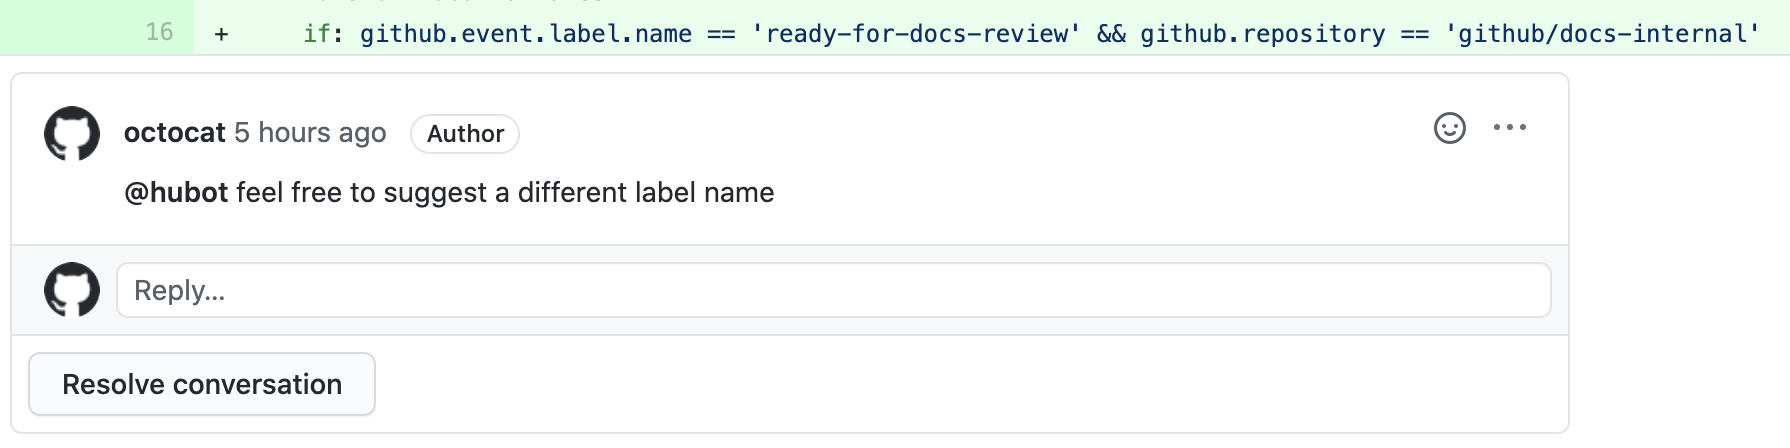 pull request comment